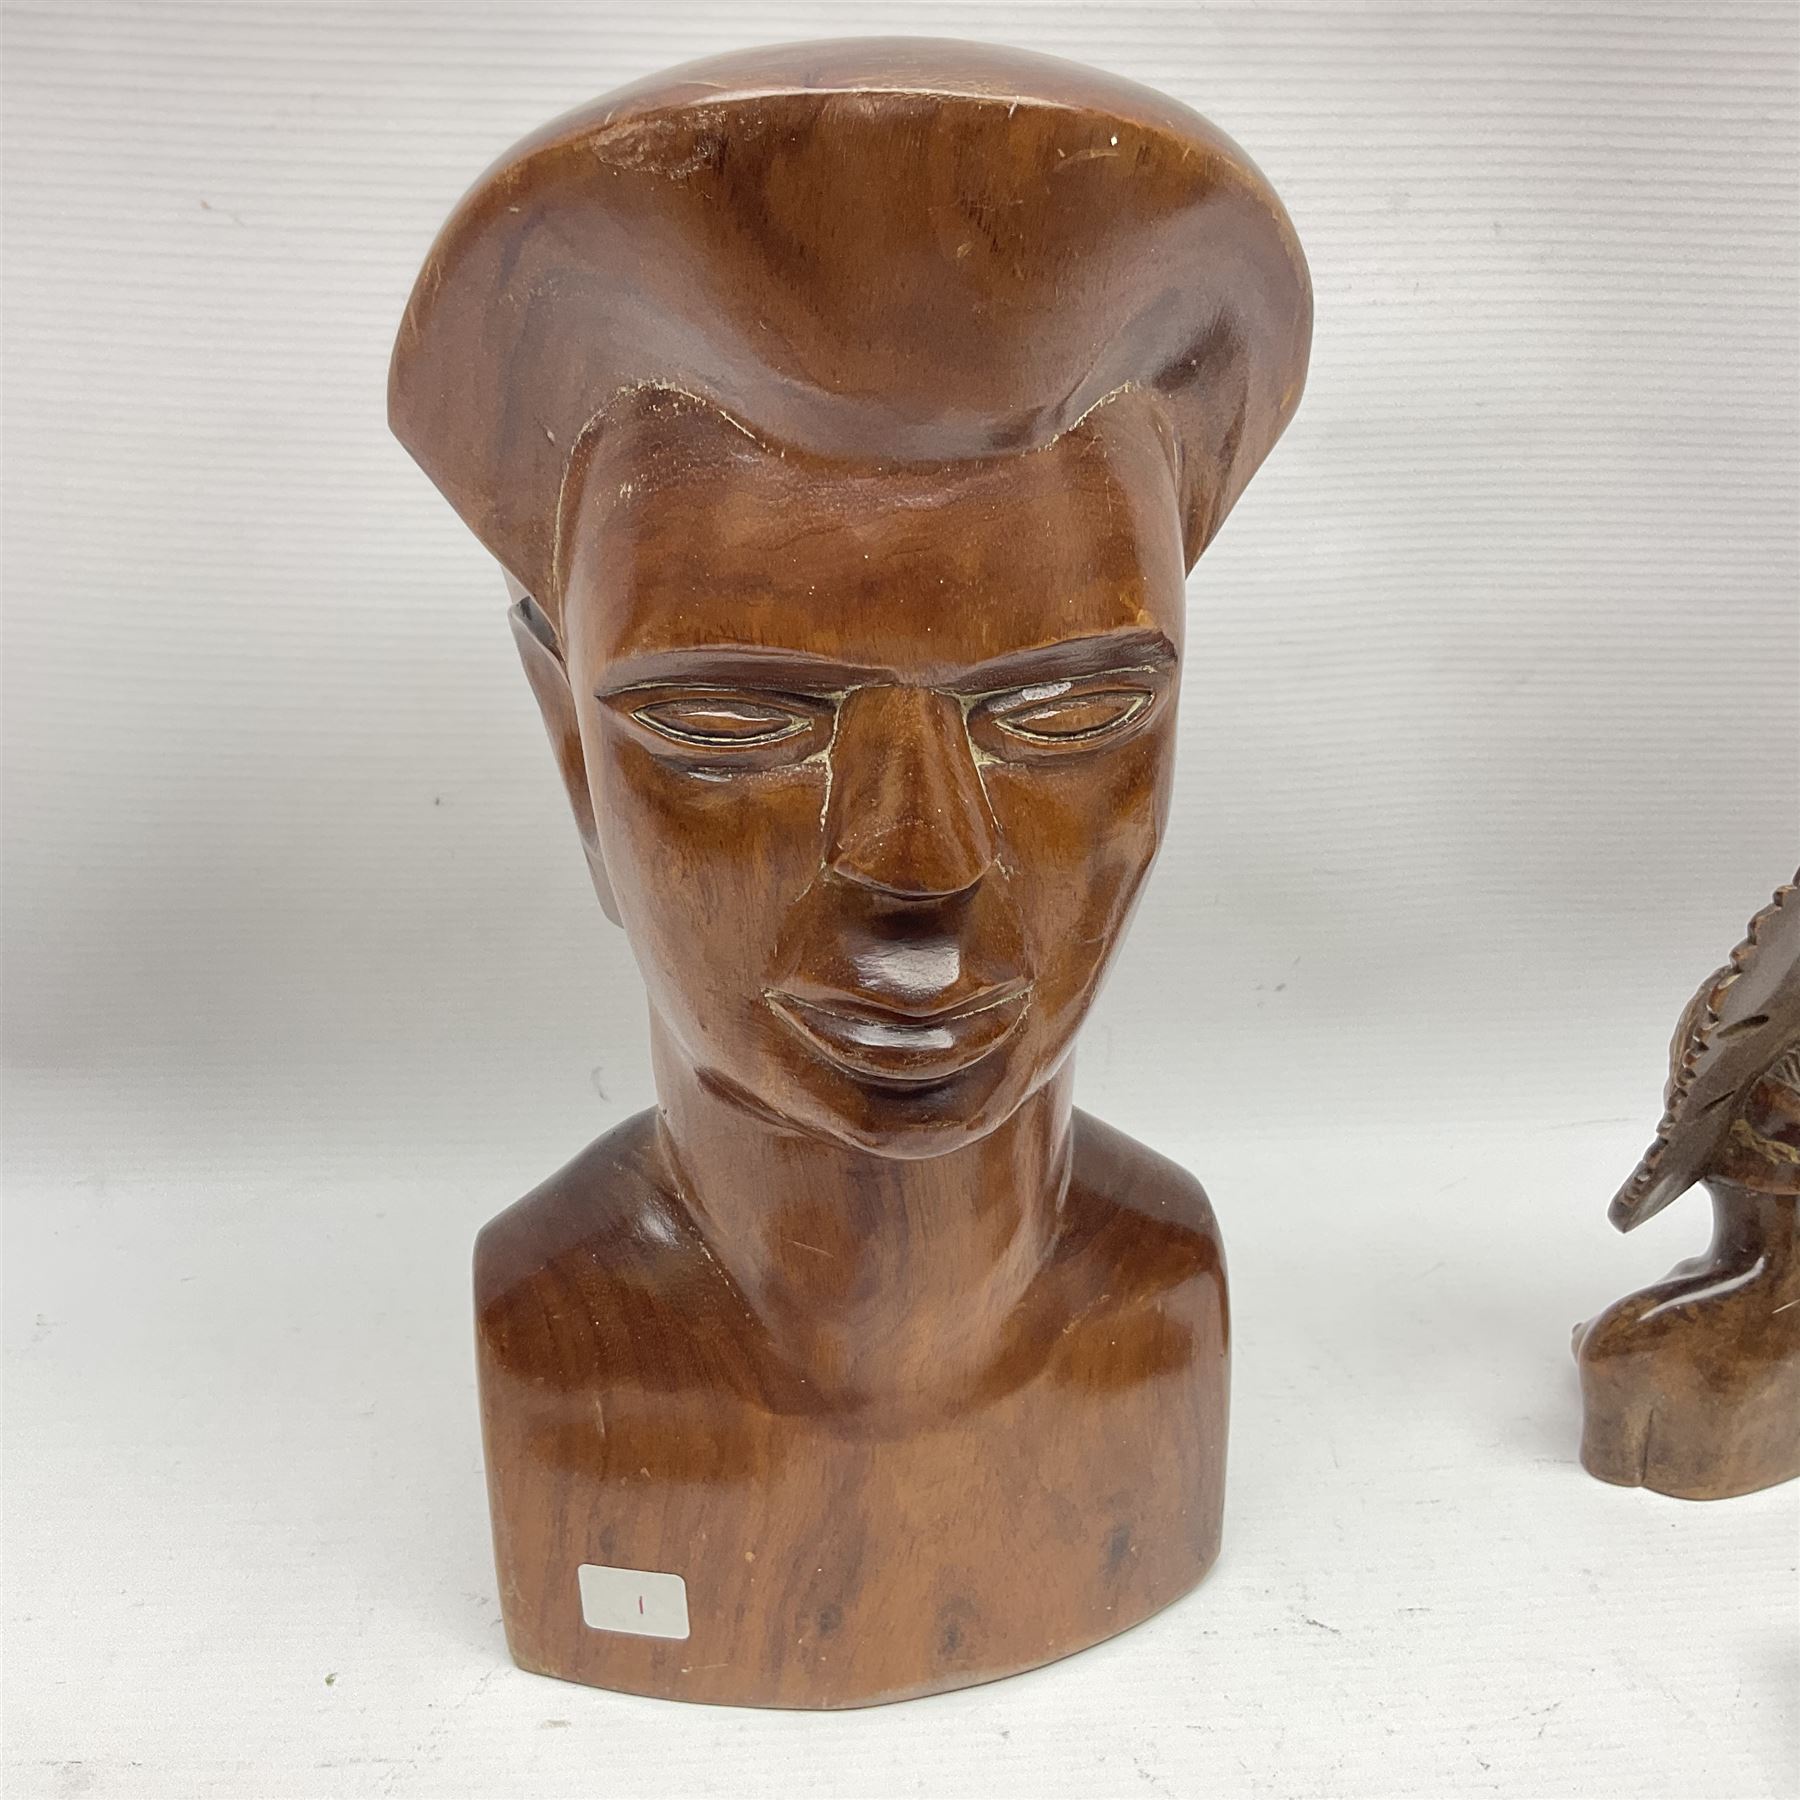 20th century wooden carvings from the Solomon Islands - Image 8 of 10